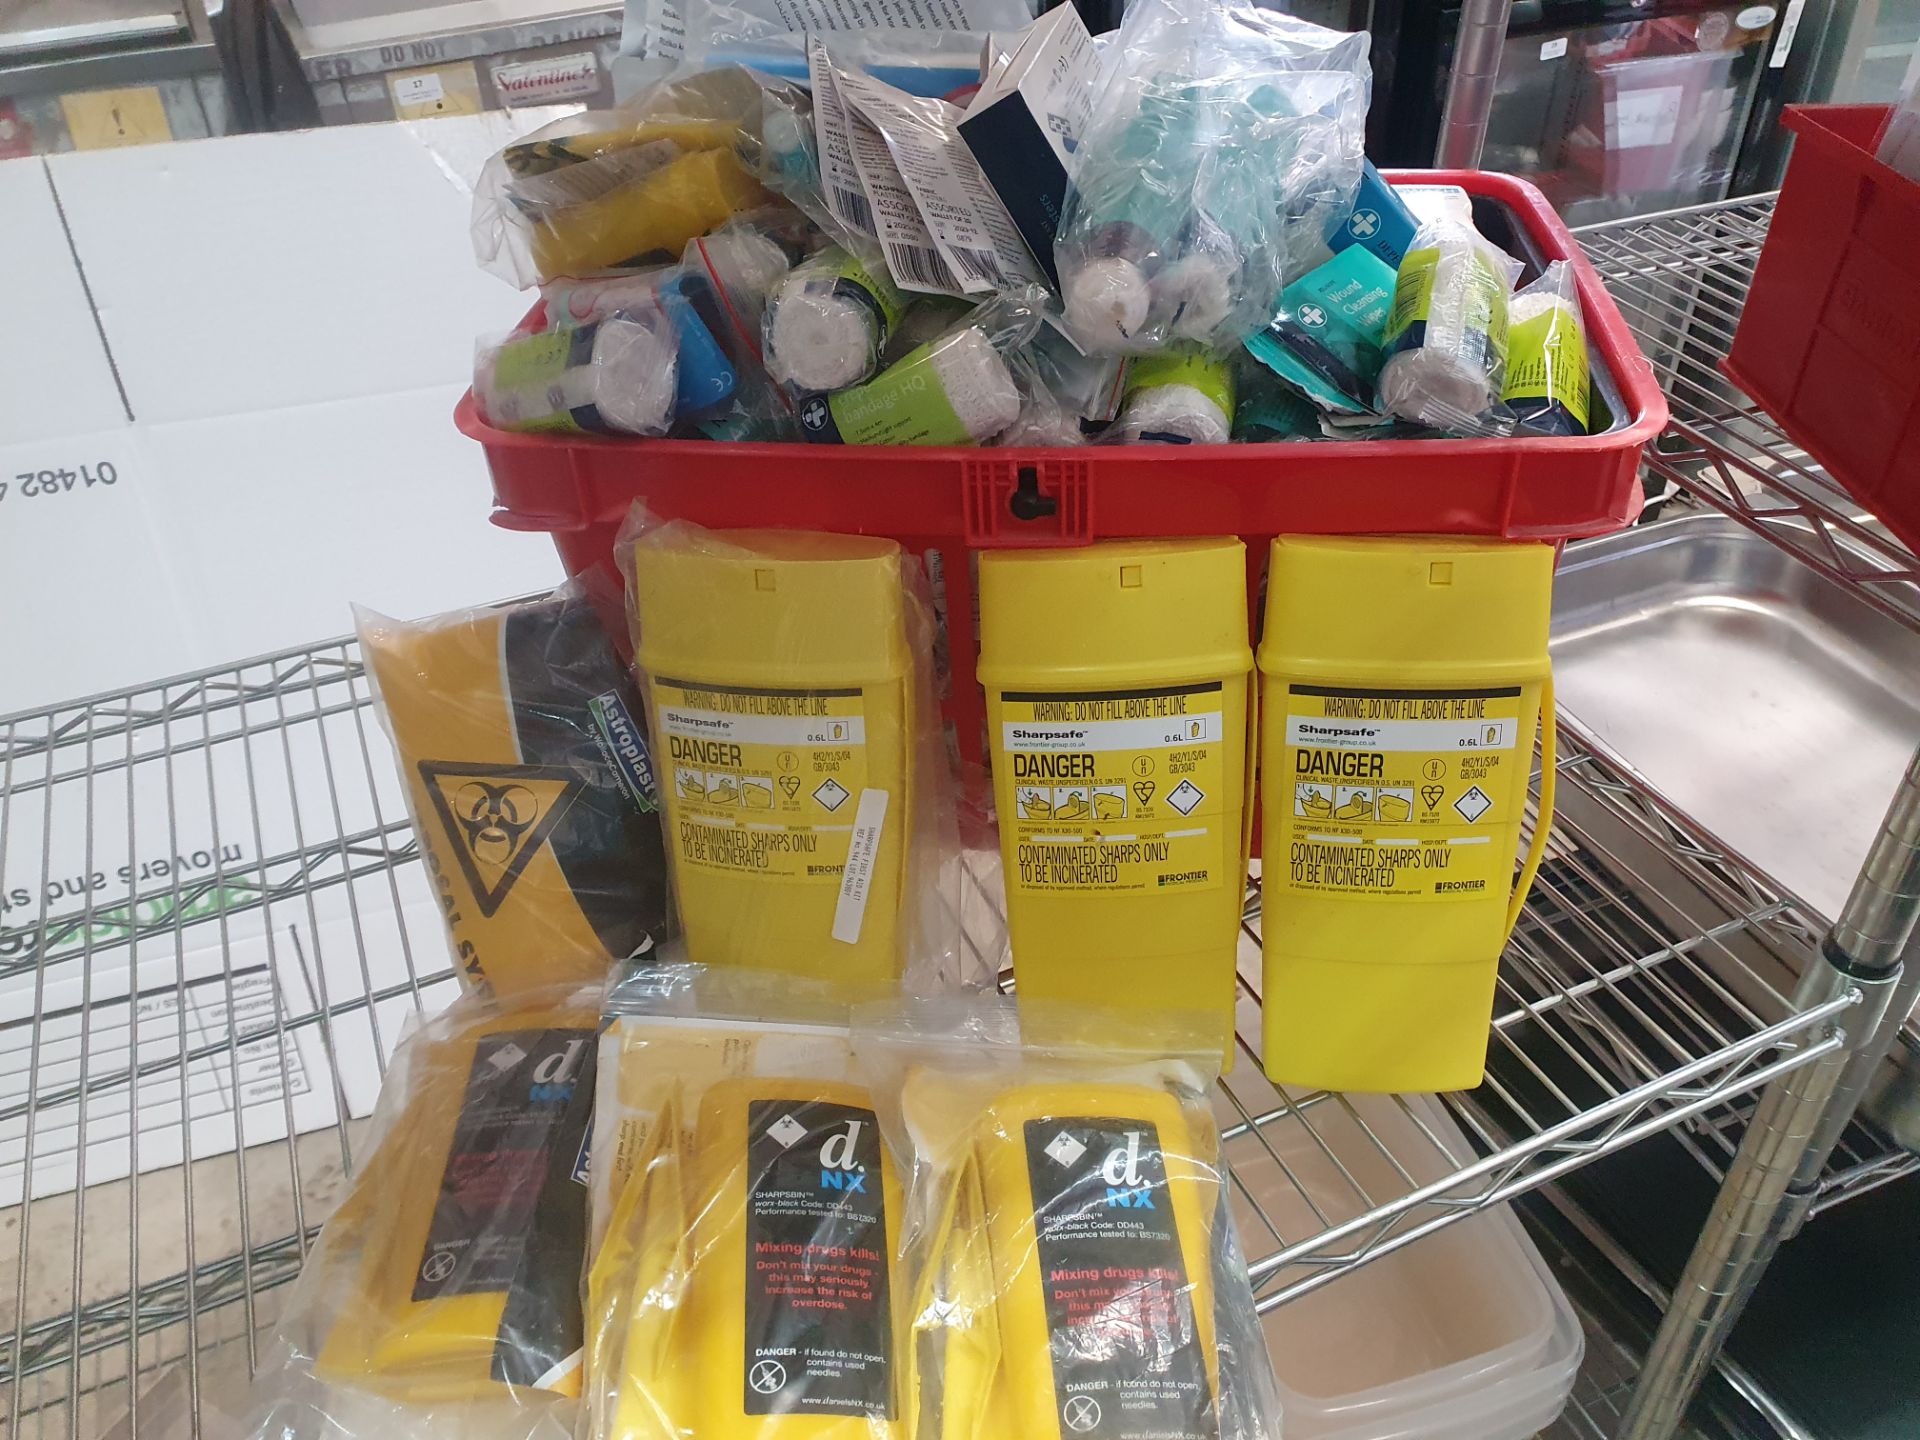 * large quantity of first aid items and sharps boxes. Bandages, plasters, wipes, eye solution, etc